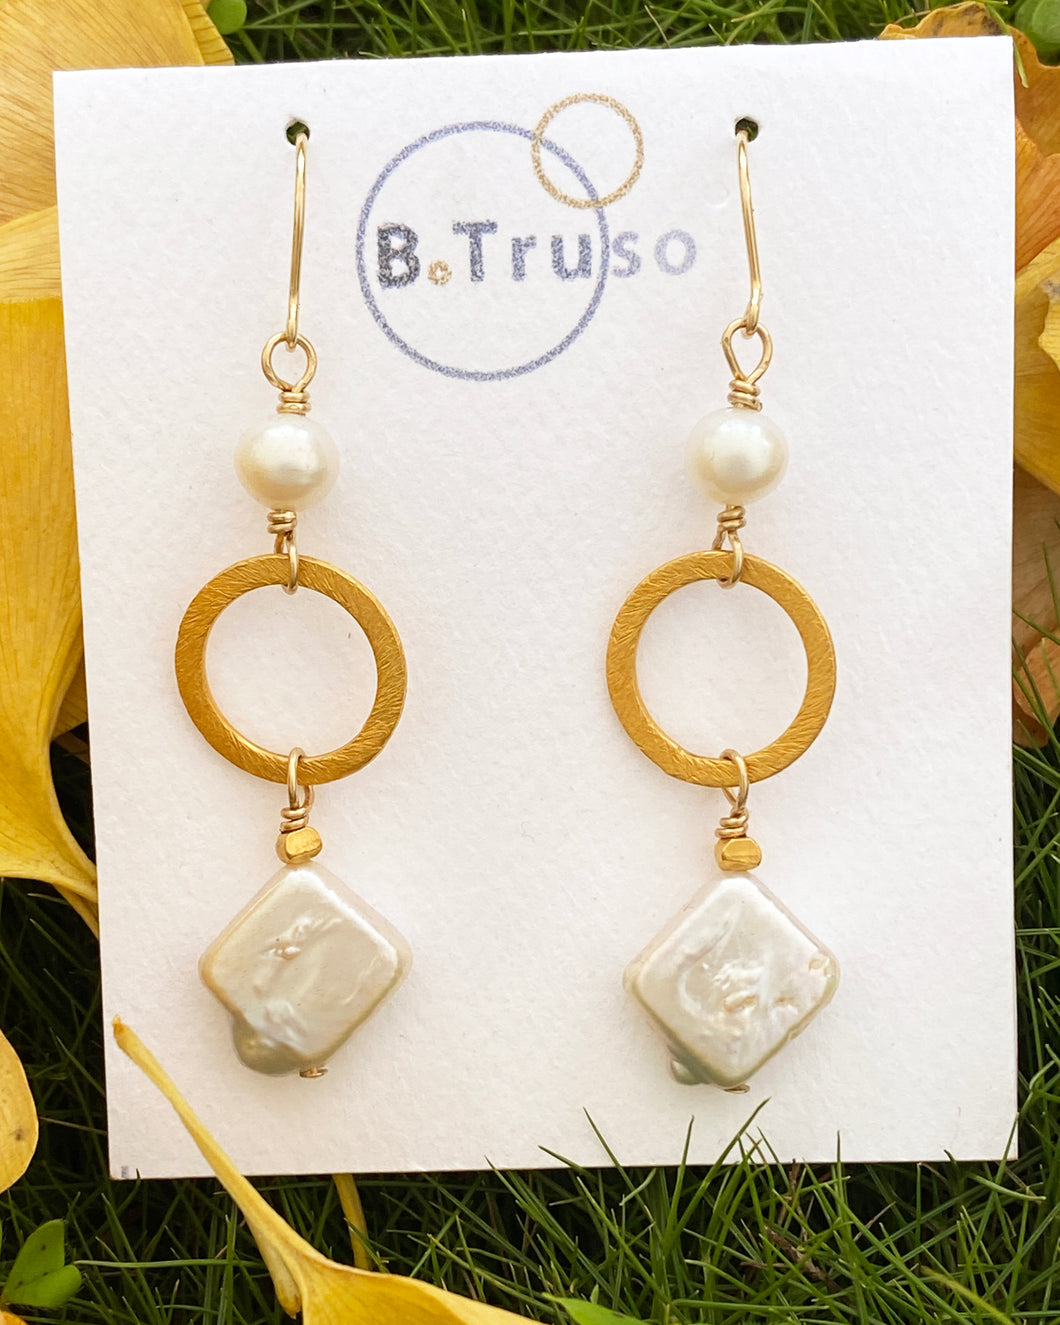 Handmade earrings with freshwater pearls and 24kt gold plate  over sterling silver circle   